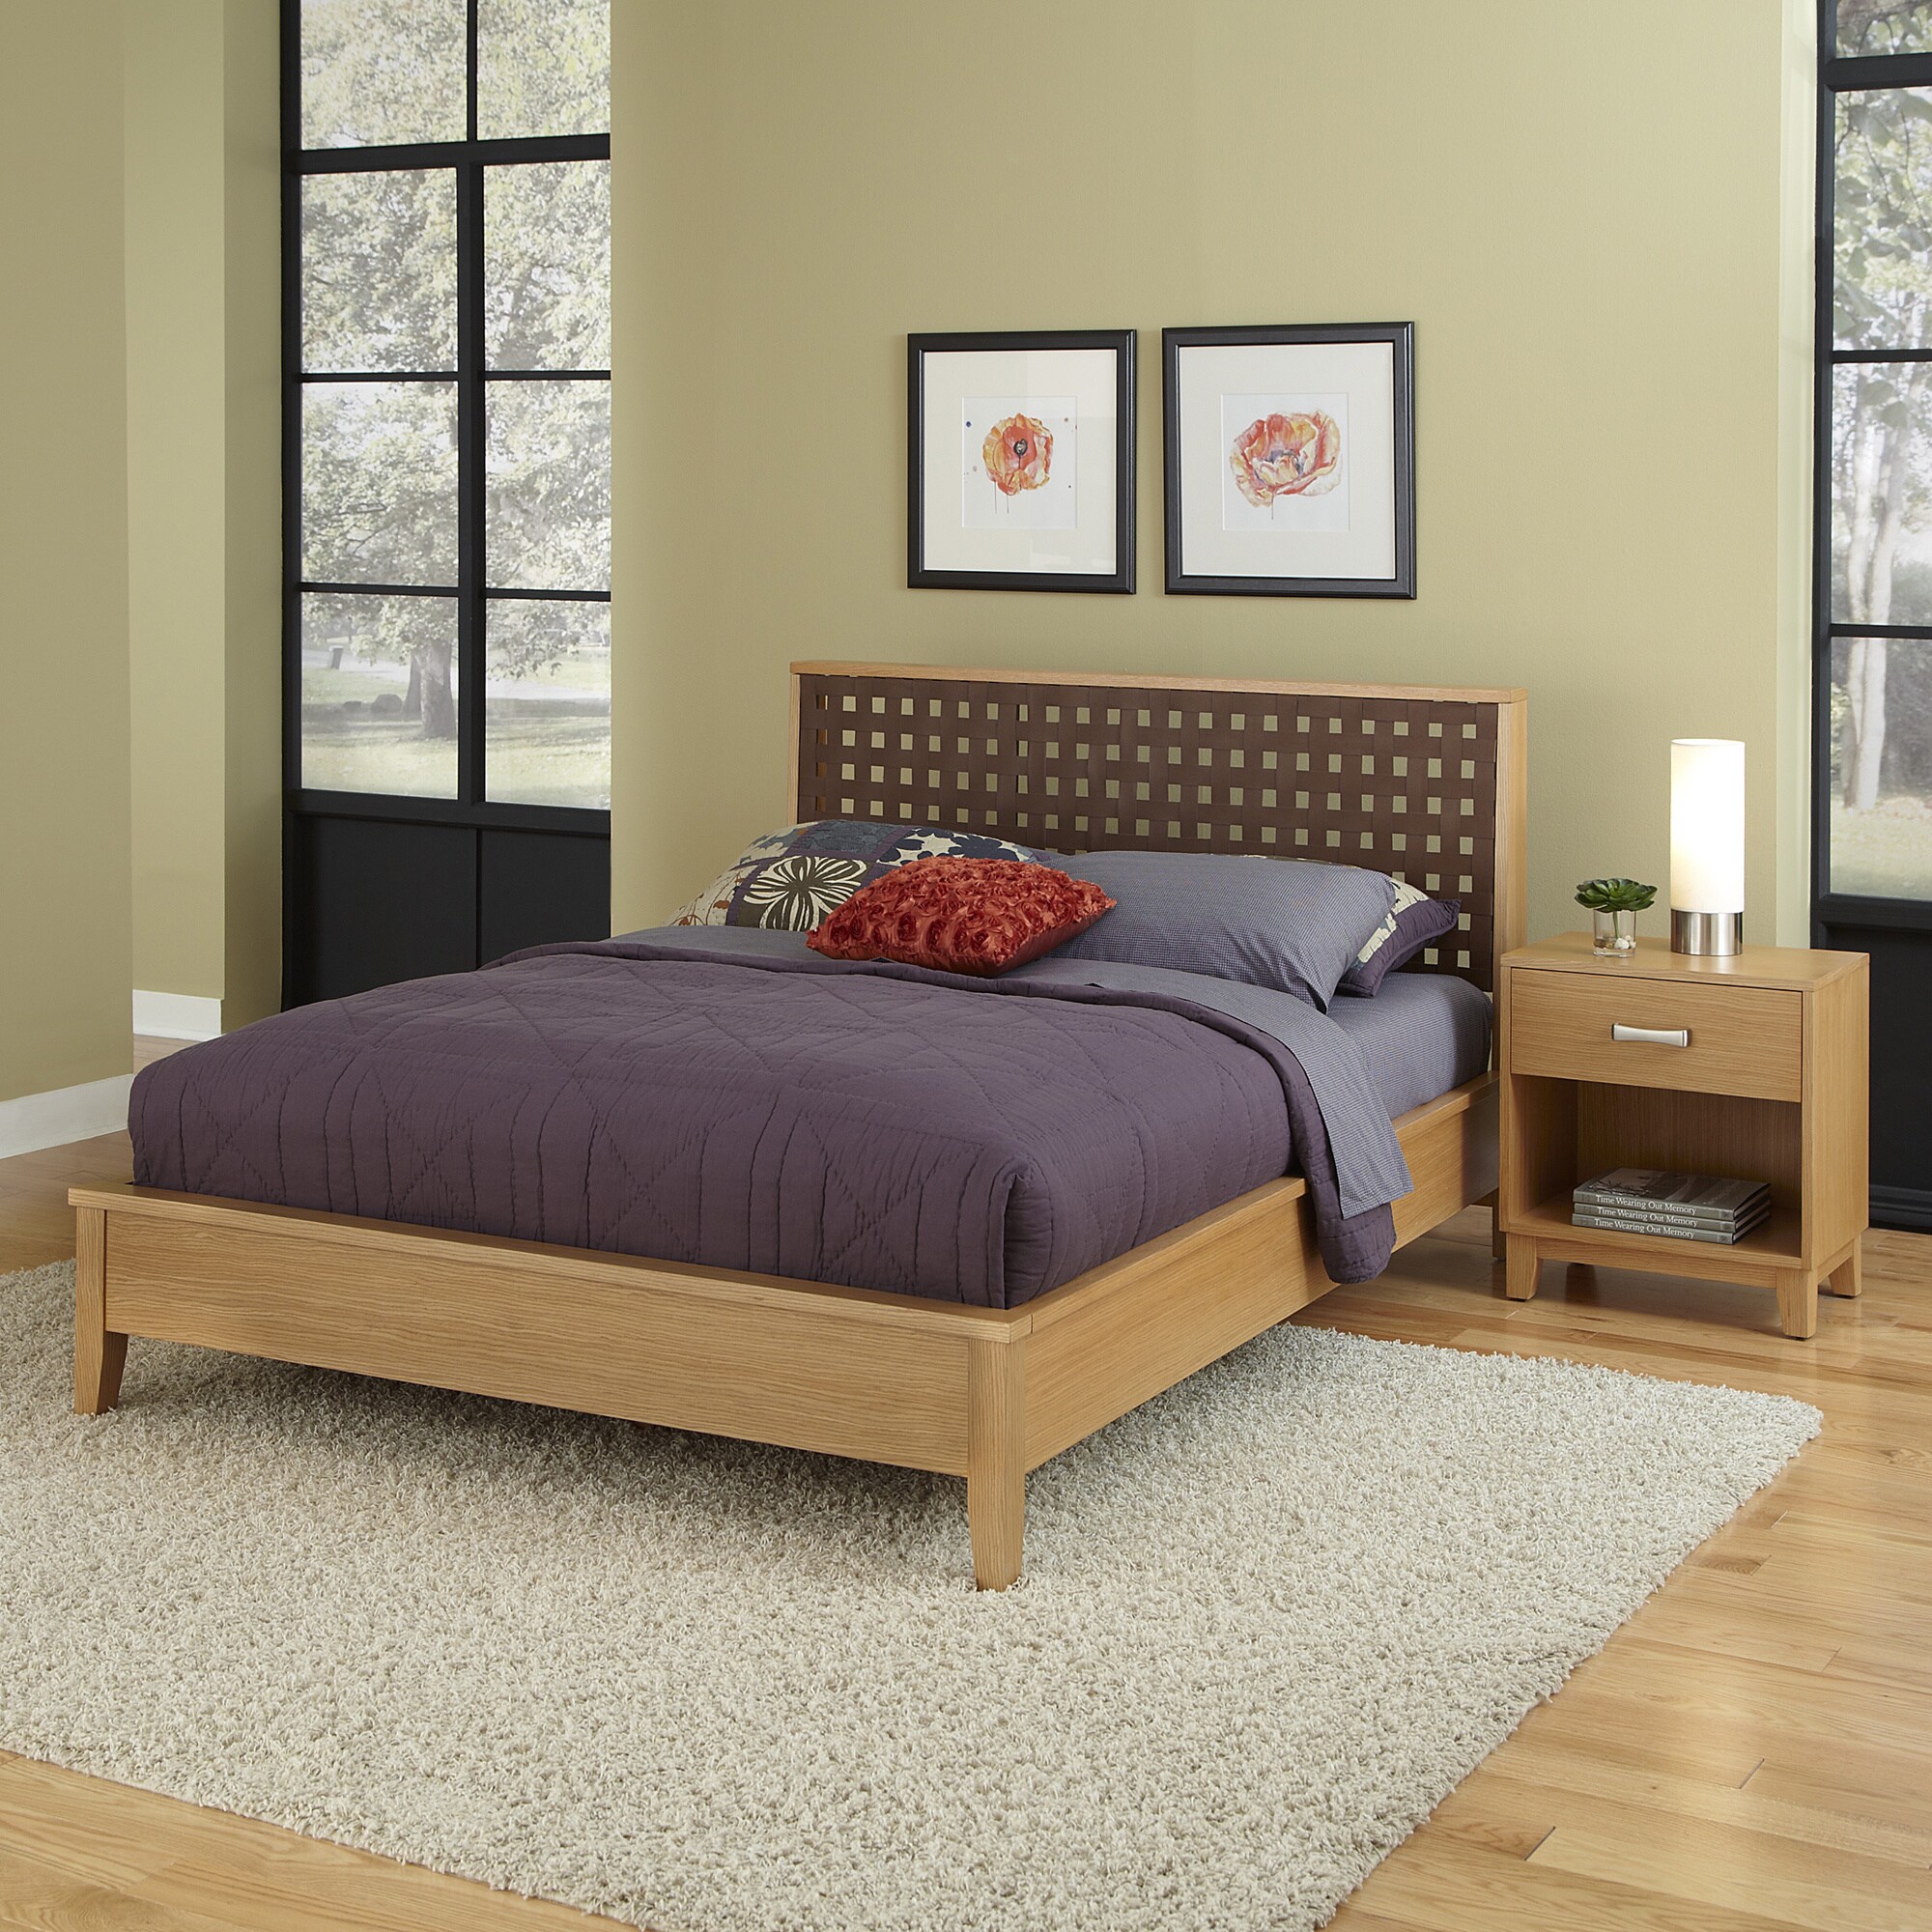 Rave King Bed And Night Stand Set (Highlighted blondeMaterials Hardwood solids, oak veneersFinish Highlighted blondeQueen Bed Dimensions 62.5 inches wide x 90.5 inches deep x 42 inches highKing Bed Dimensions 78.25 inches wide x 90.5 inches deep x 42 